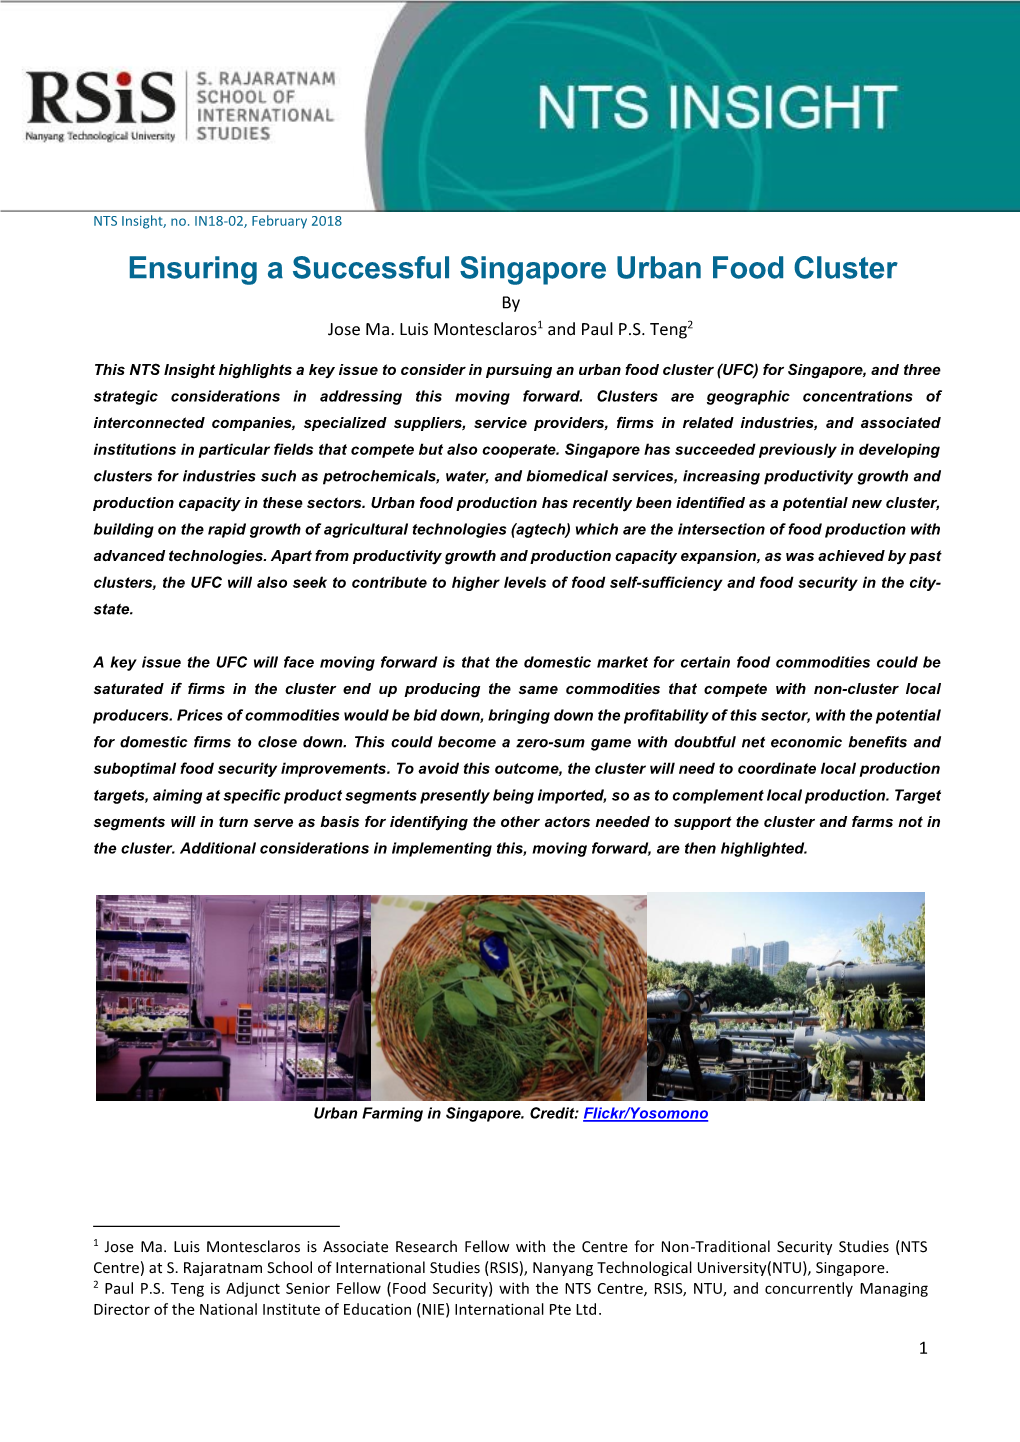 Ensuring a Successful Singapore Urban Food Cluster by Jose Ma